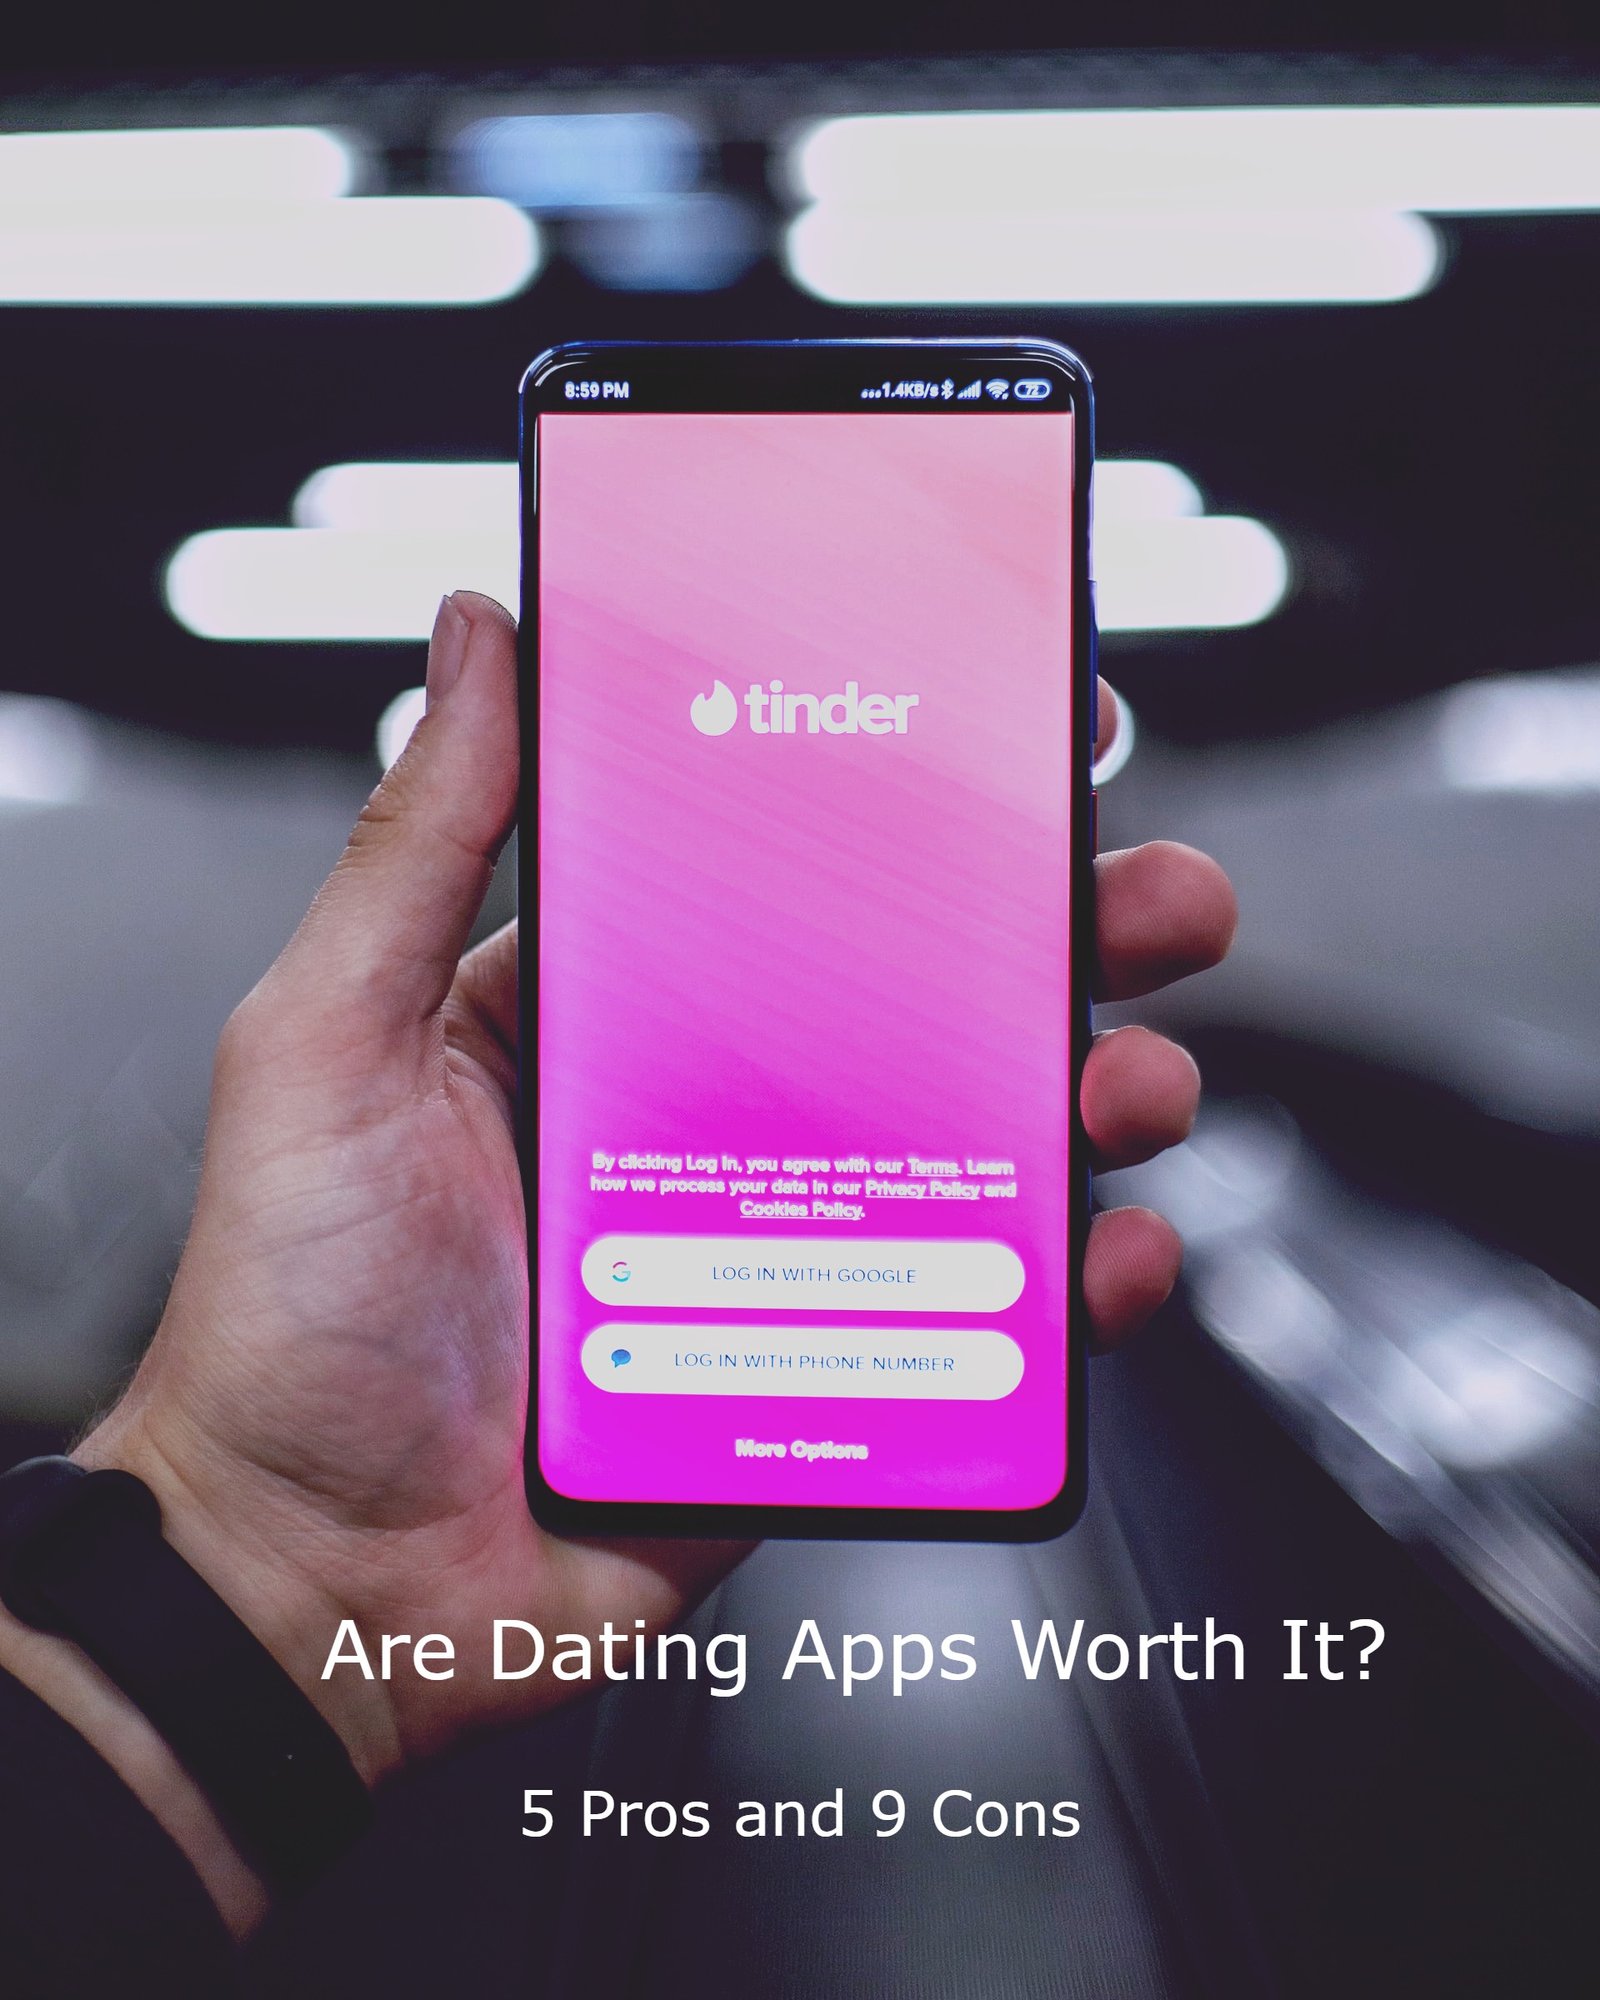 Are dating apps worth it